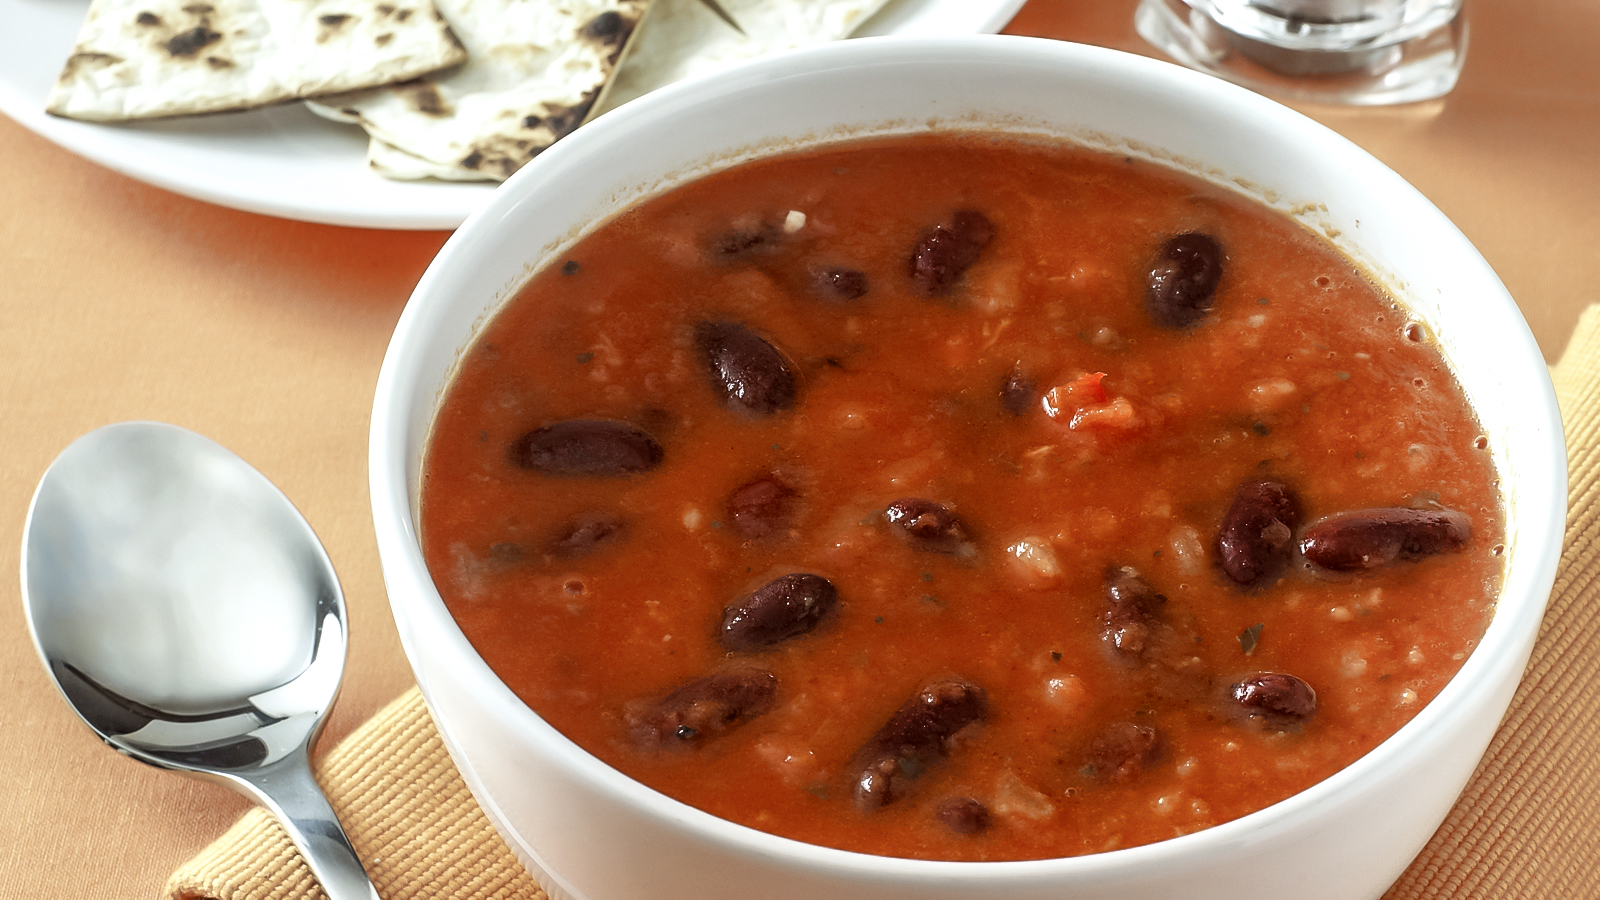 uploads/images/spicy_mexican_bean_soup_91809_16x9.jpg